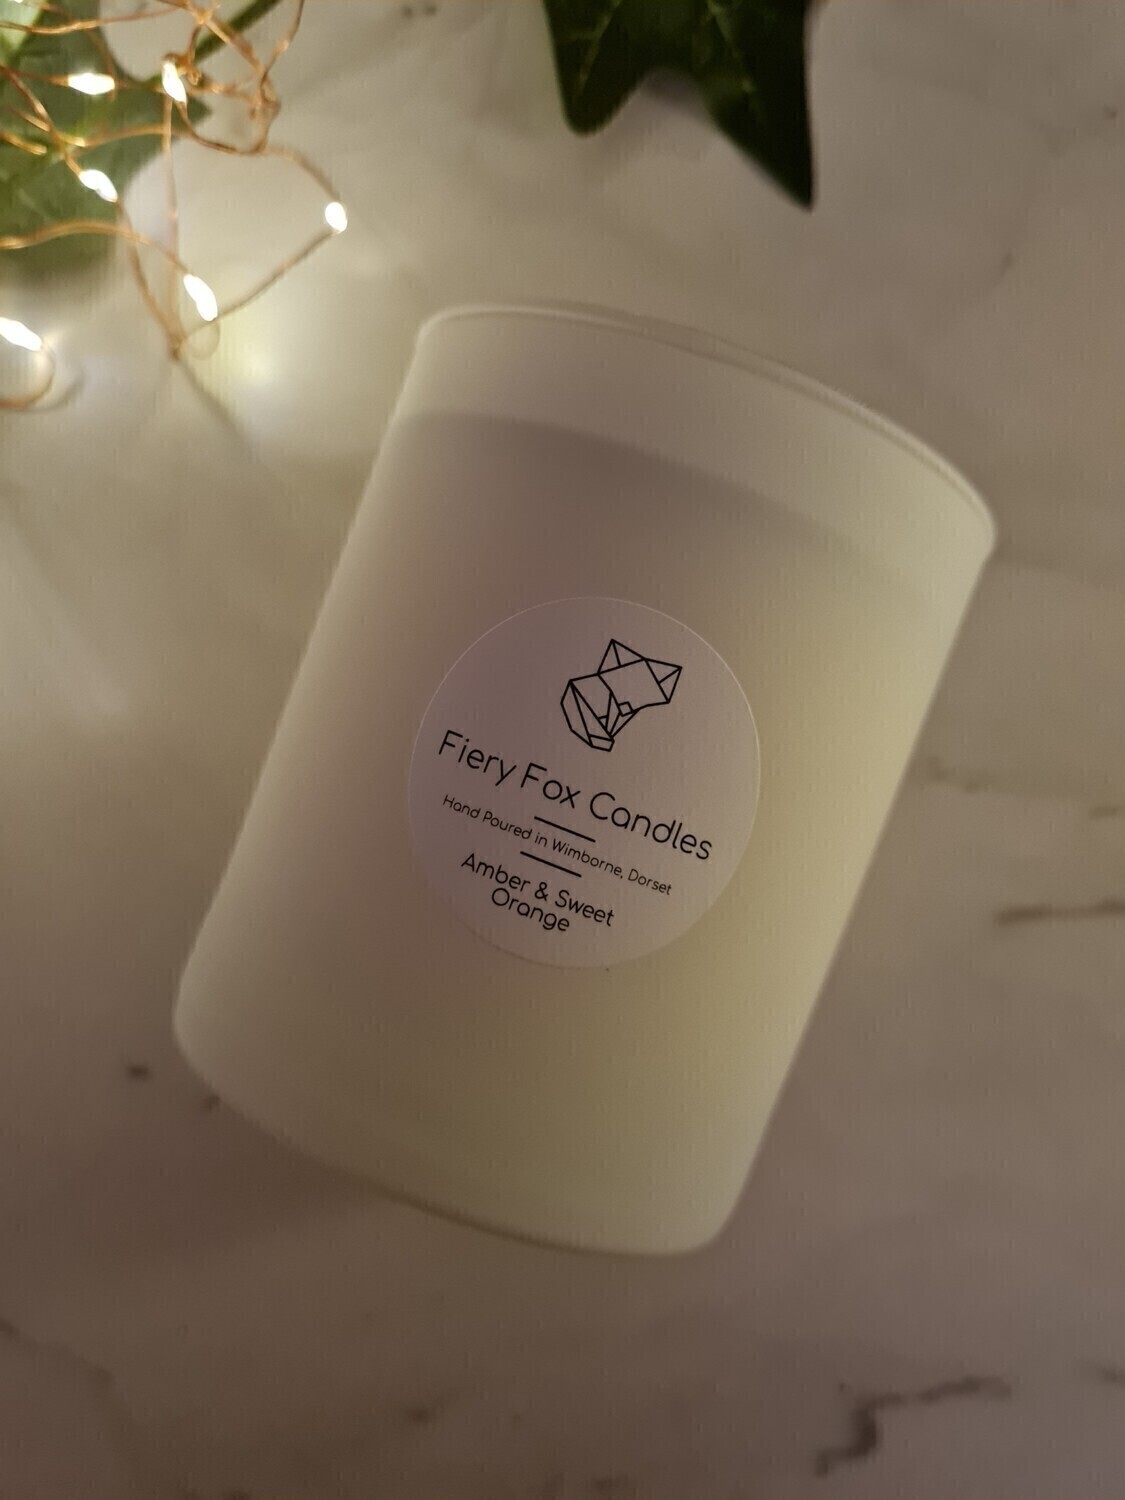 30cl Soy Wax Candle - 'Candy Cane' Scent (in white glass)